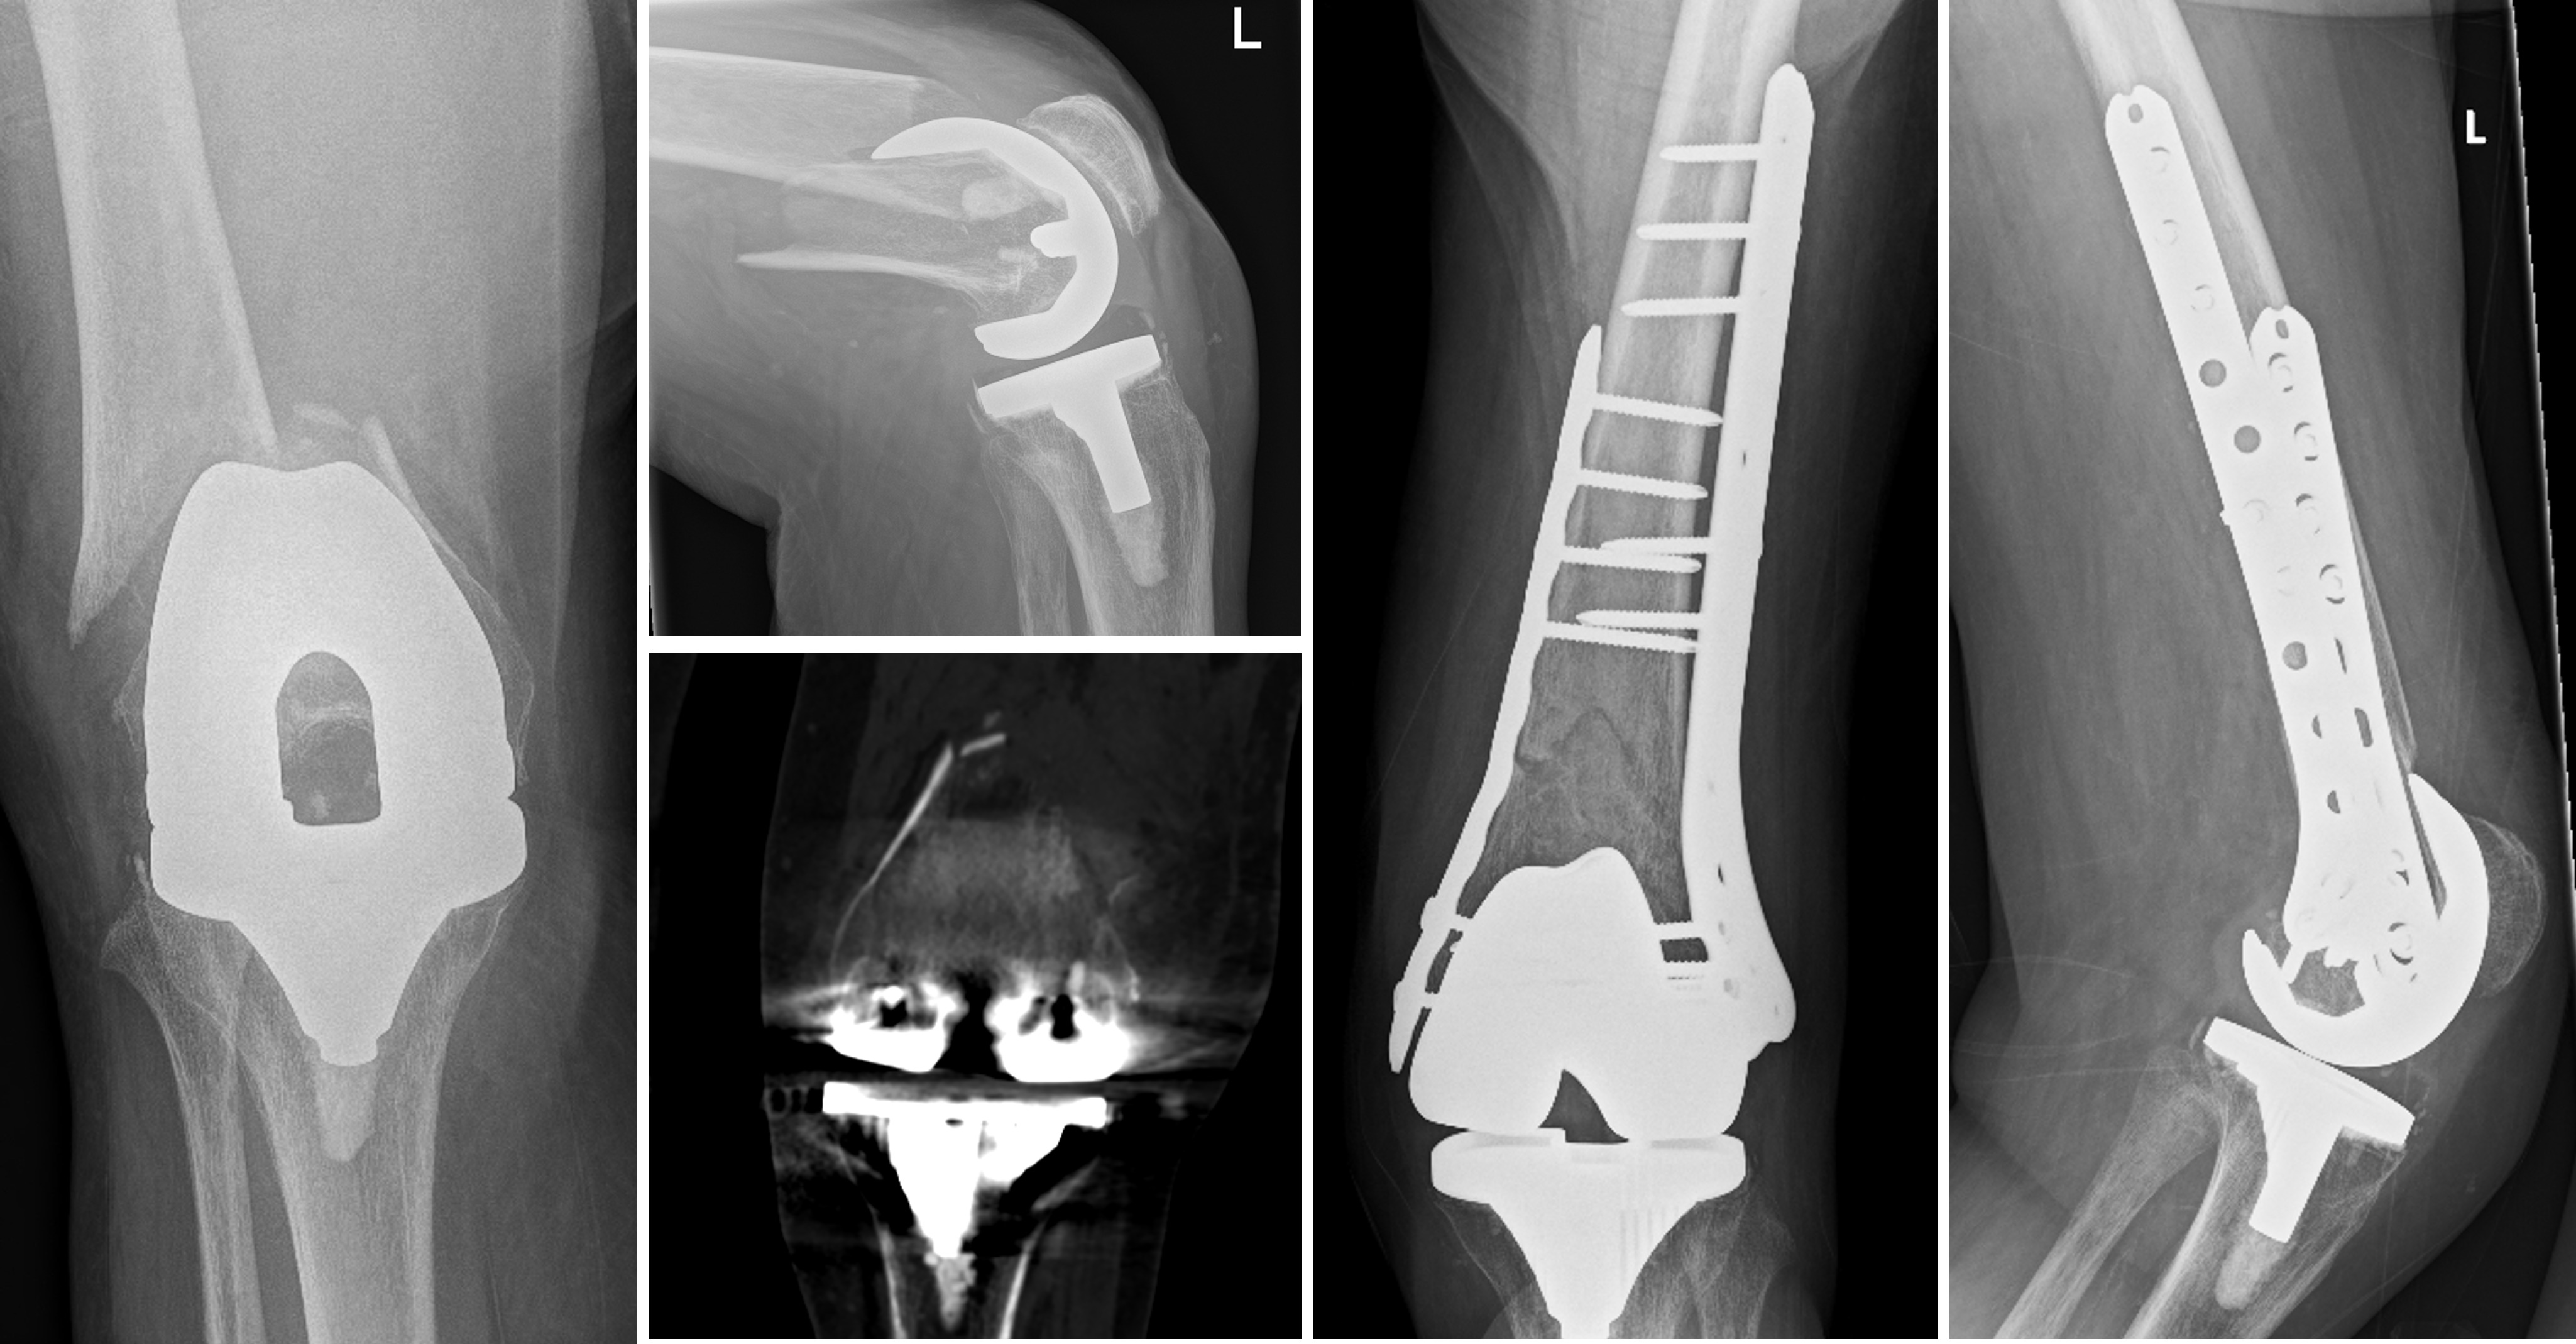 Fig. 1 
          Anteroposterior and lateral views of a periprosthetic distal femur fracture in a 73-year-old female around a standard total knee arthroplasty treated with double plating. The coronal plane CT image confirms no additional sagittal plane split in the distal fragment, and sufficient bone stock to enable fixation. Post fixation radiographs are shown here at seven months.
        